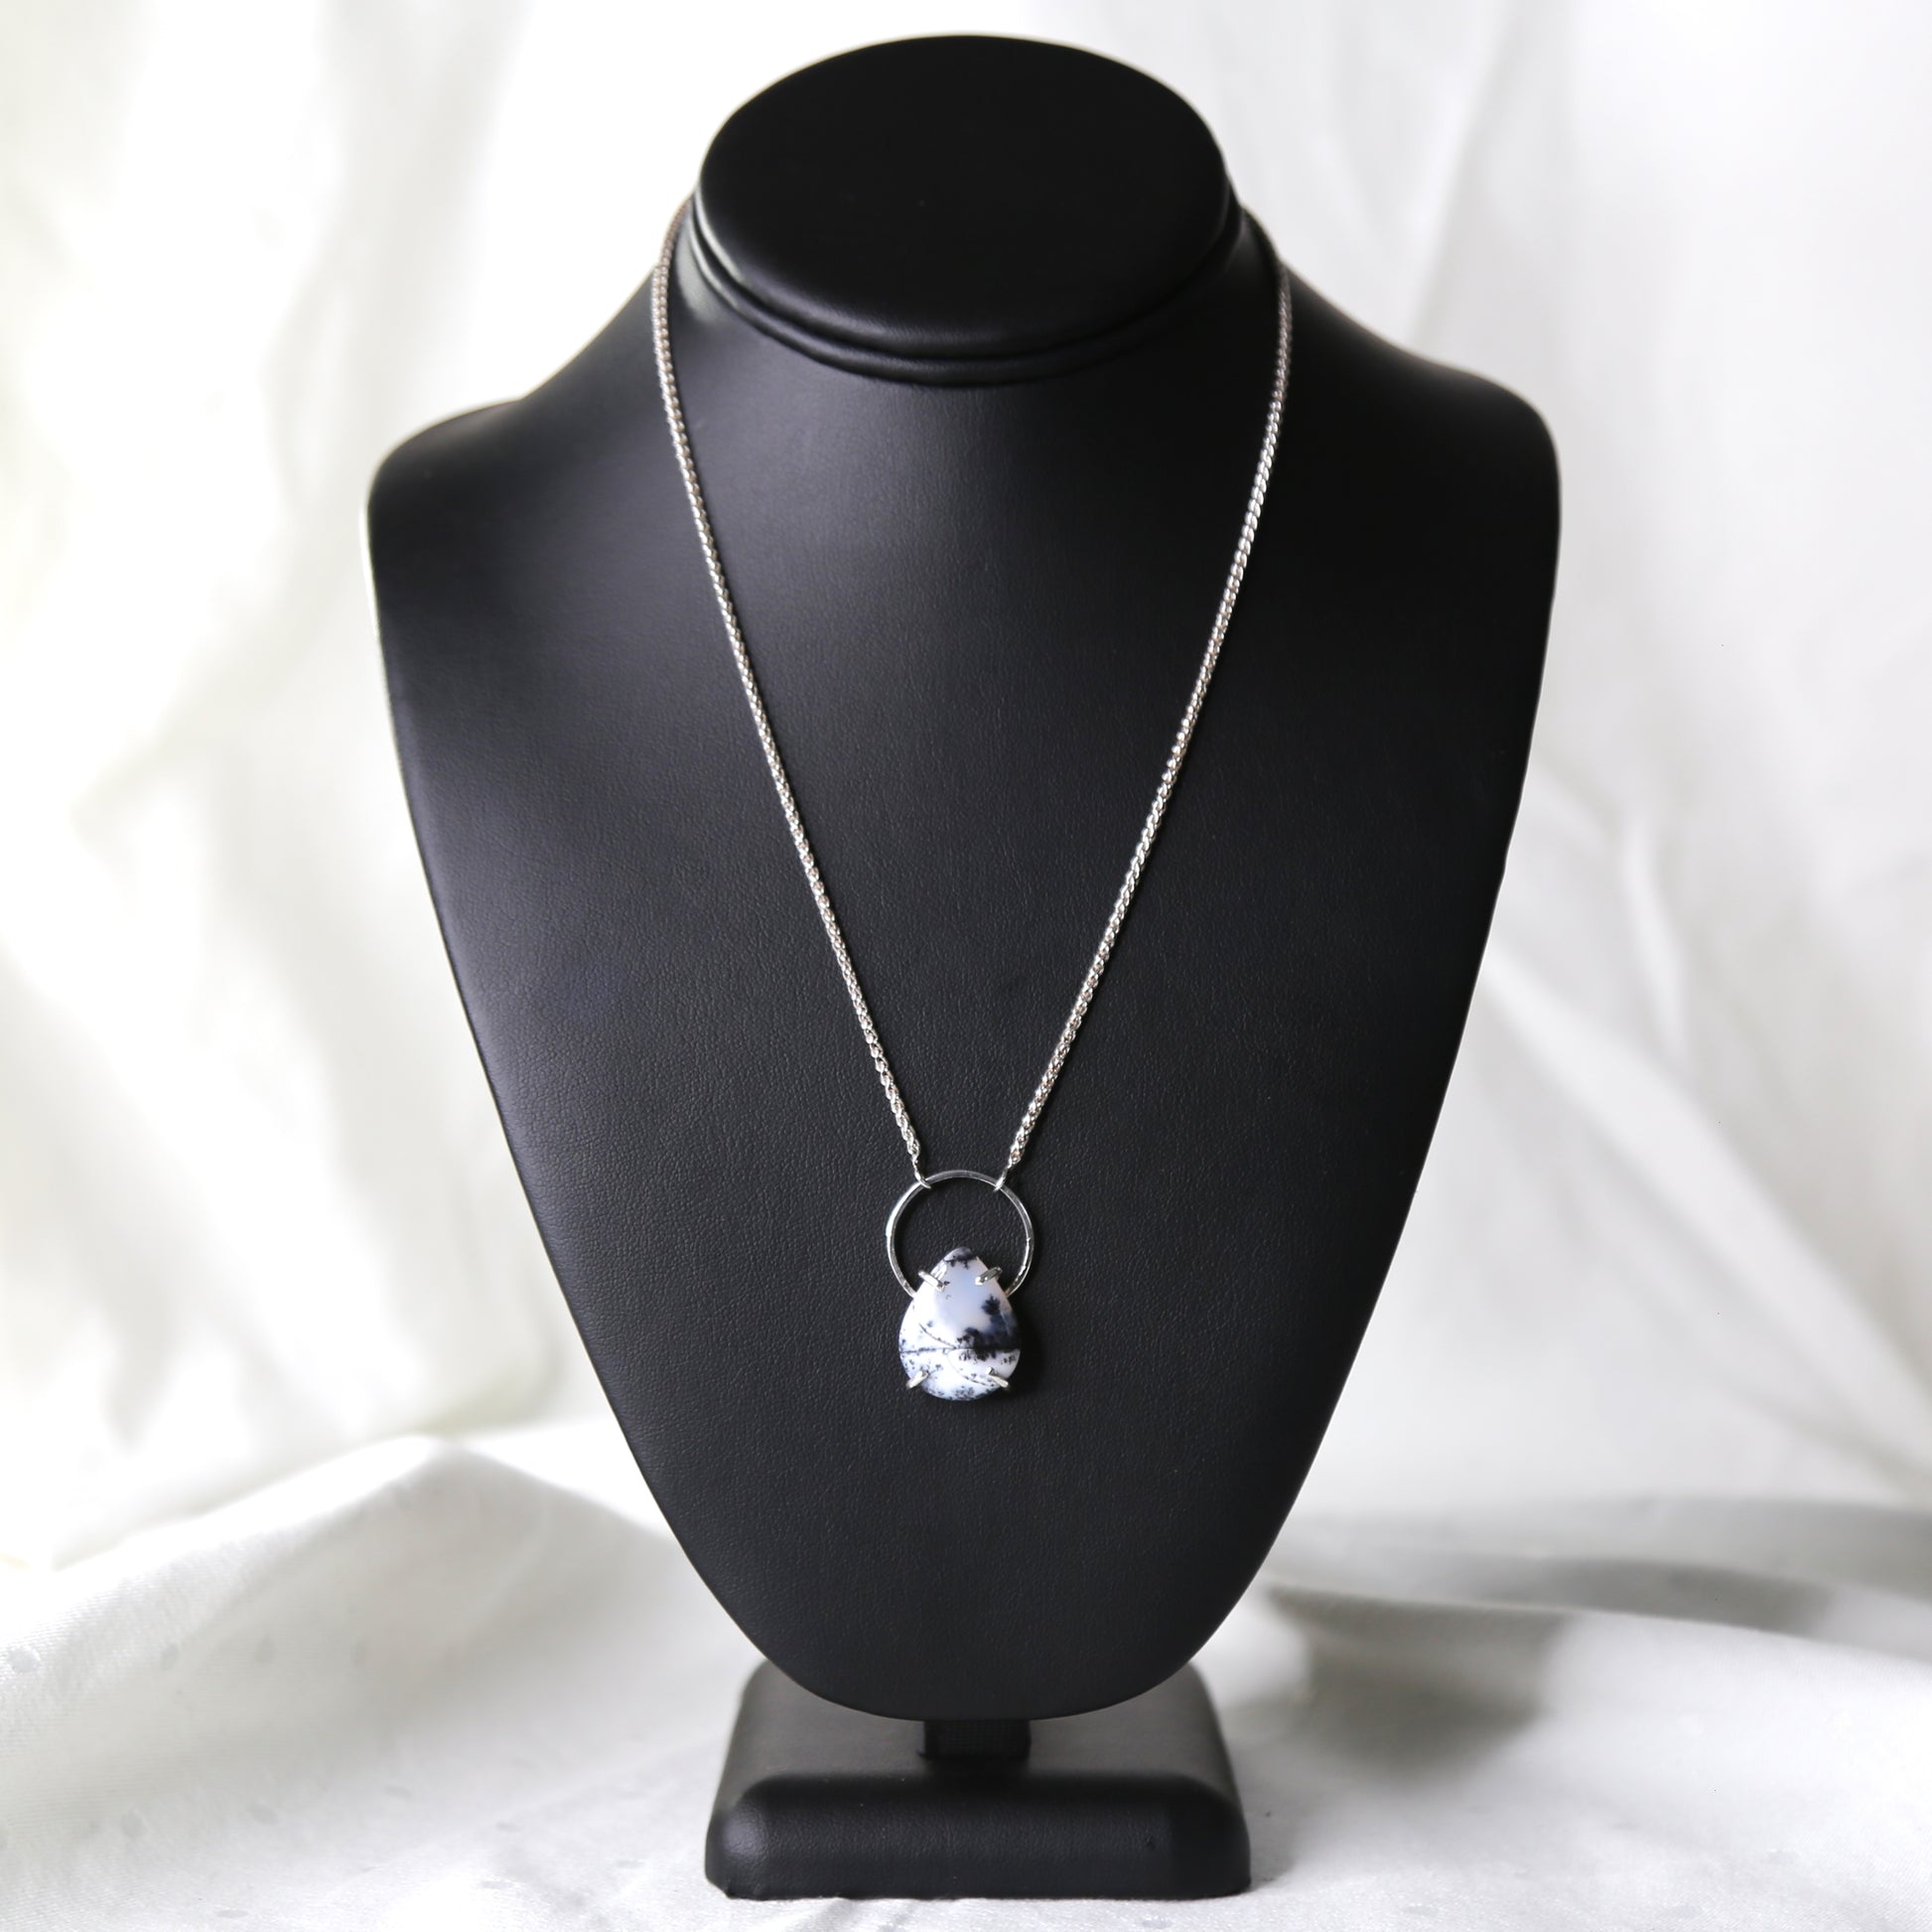 Dendritic Opal White and Black Teardrop Gemstone in Sterling Silver Halo Setting on Wheat Chain